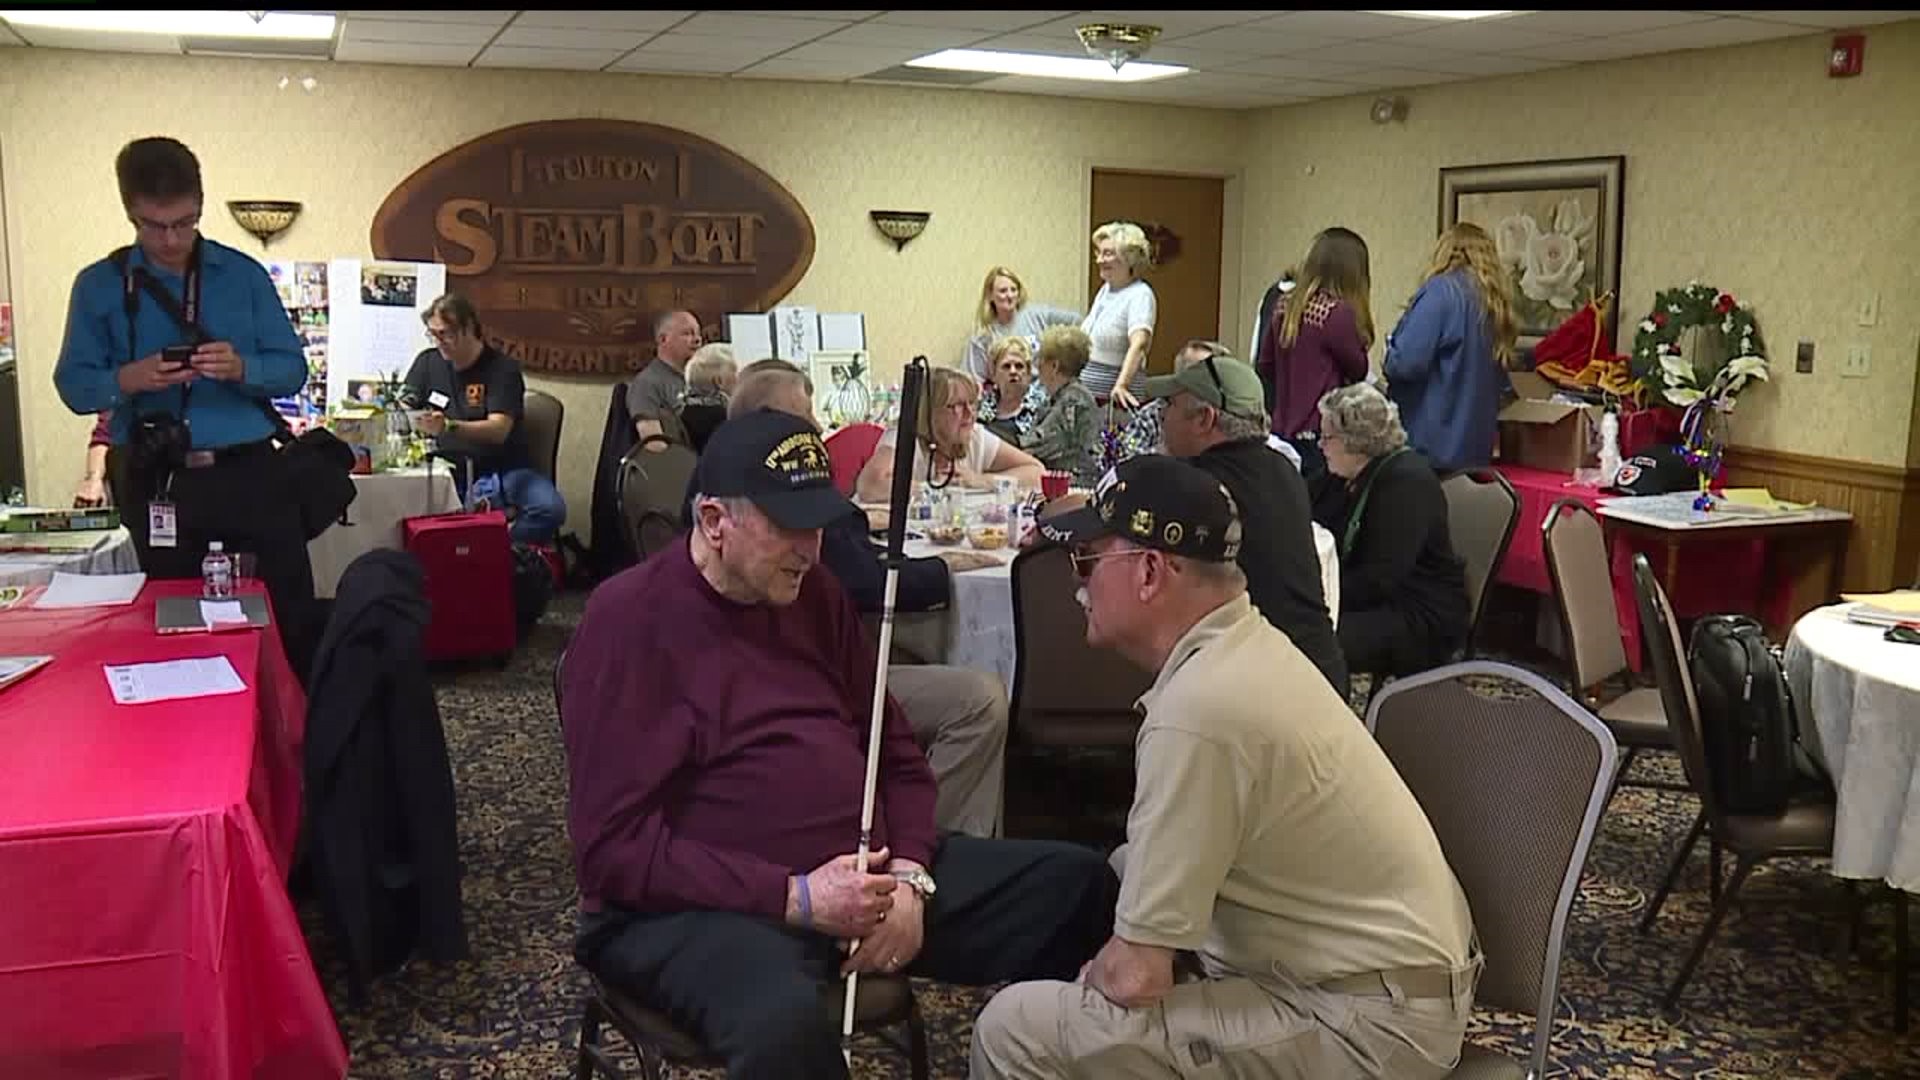 World War II veterans of the 17th airborne division meet for reunion